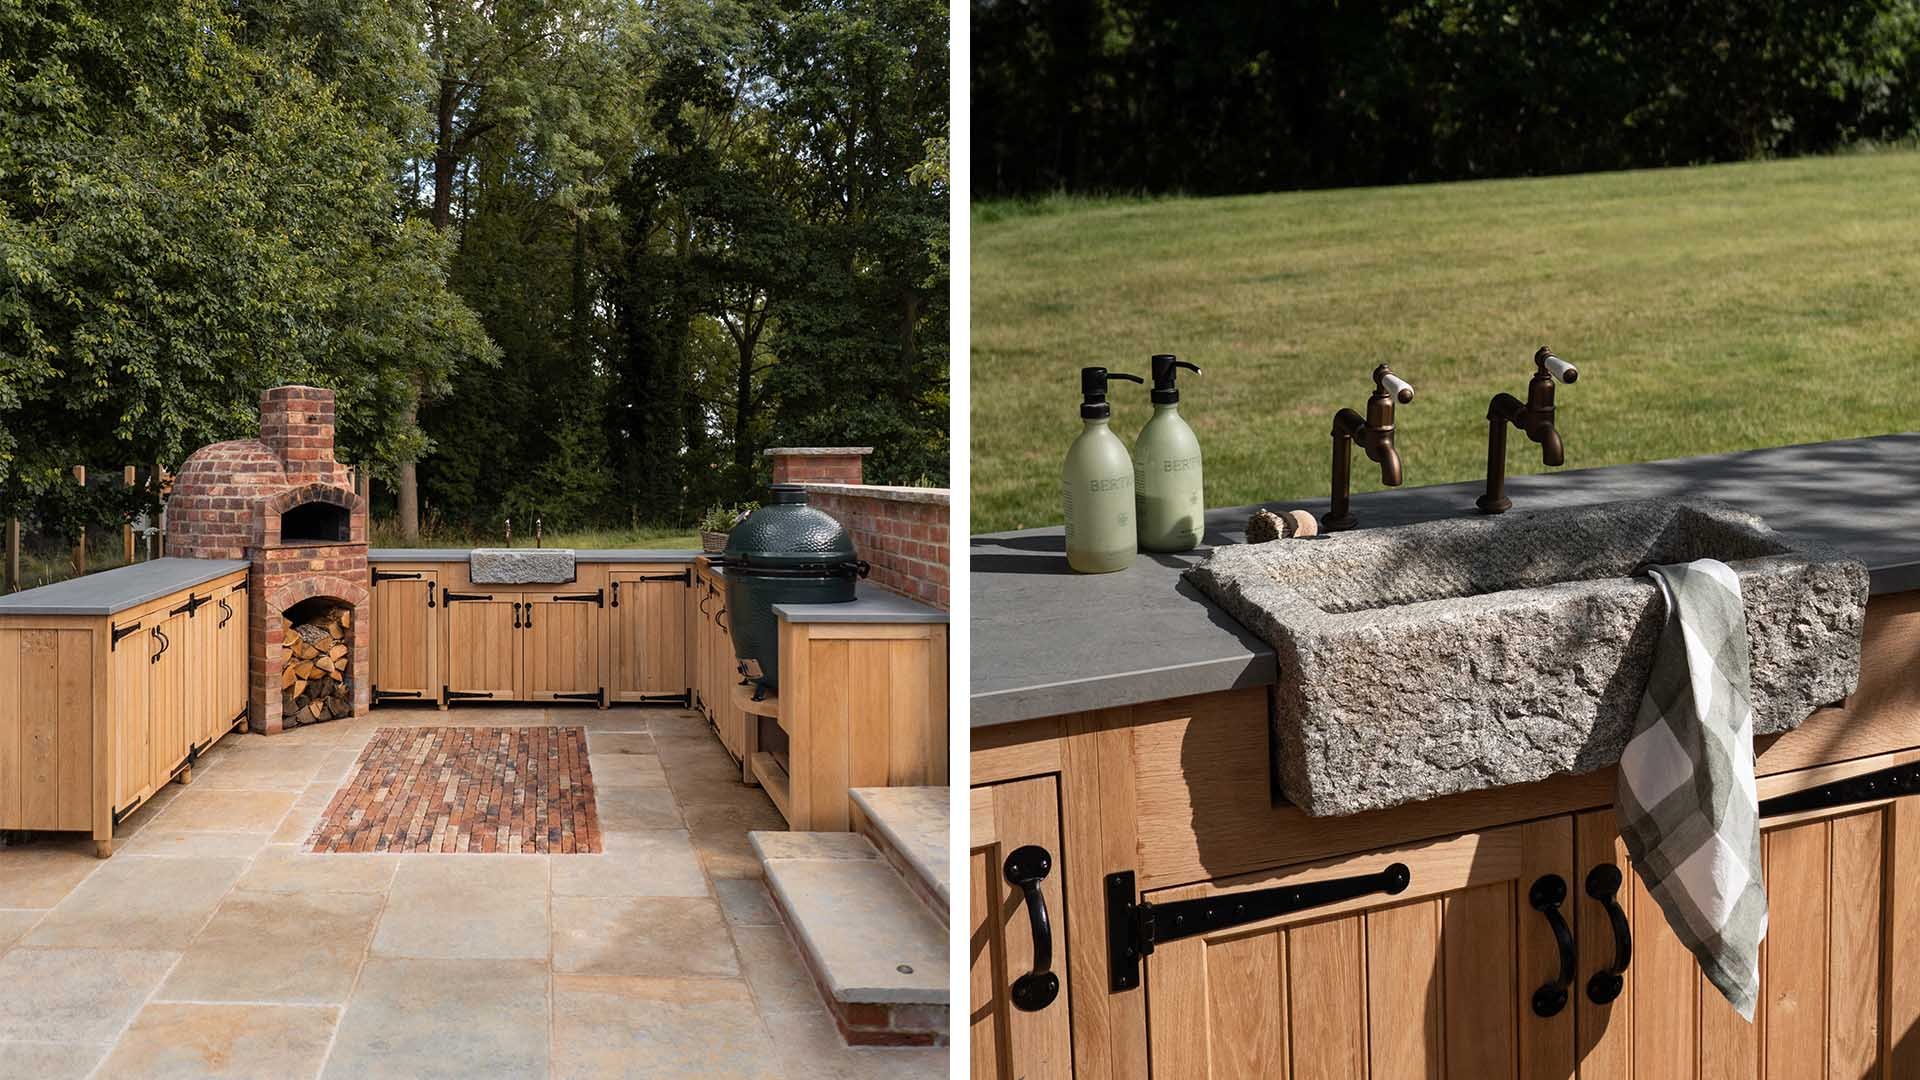 Close-up images of Caesarstone Porcelain worktops for outdoor kitchens